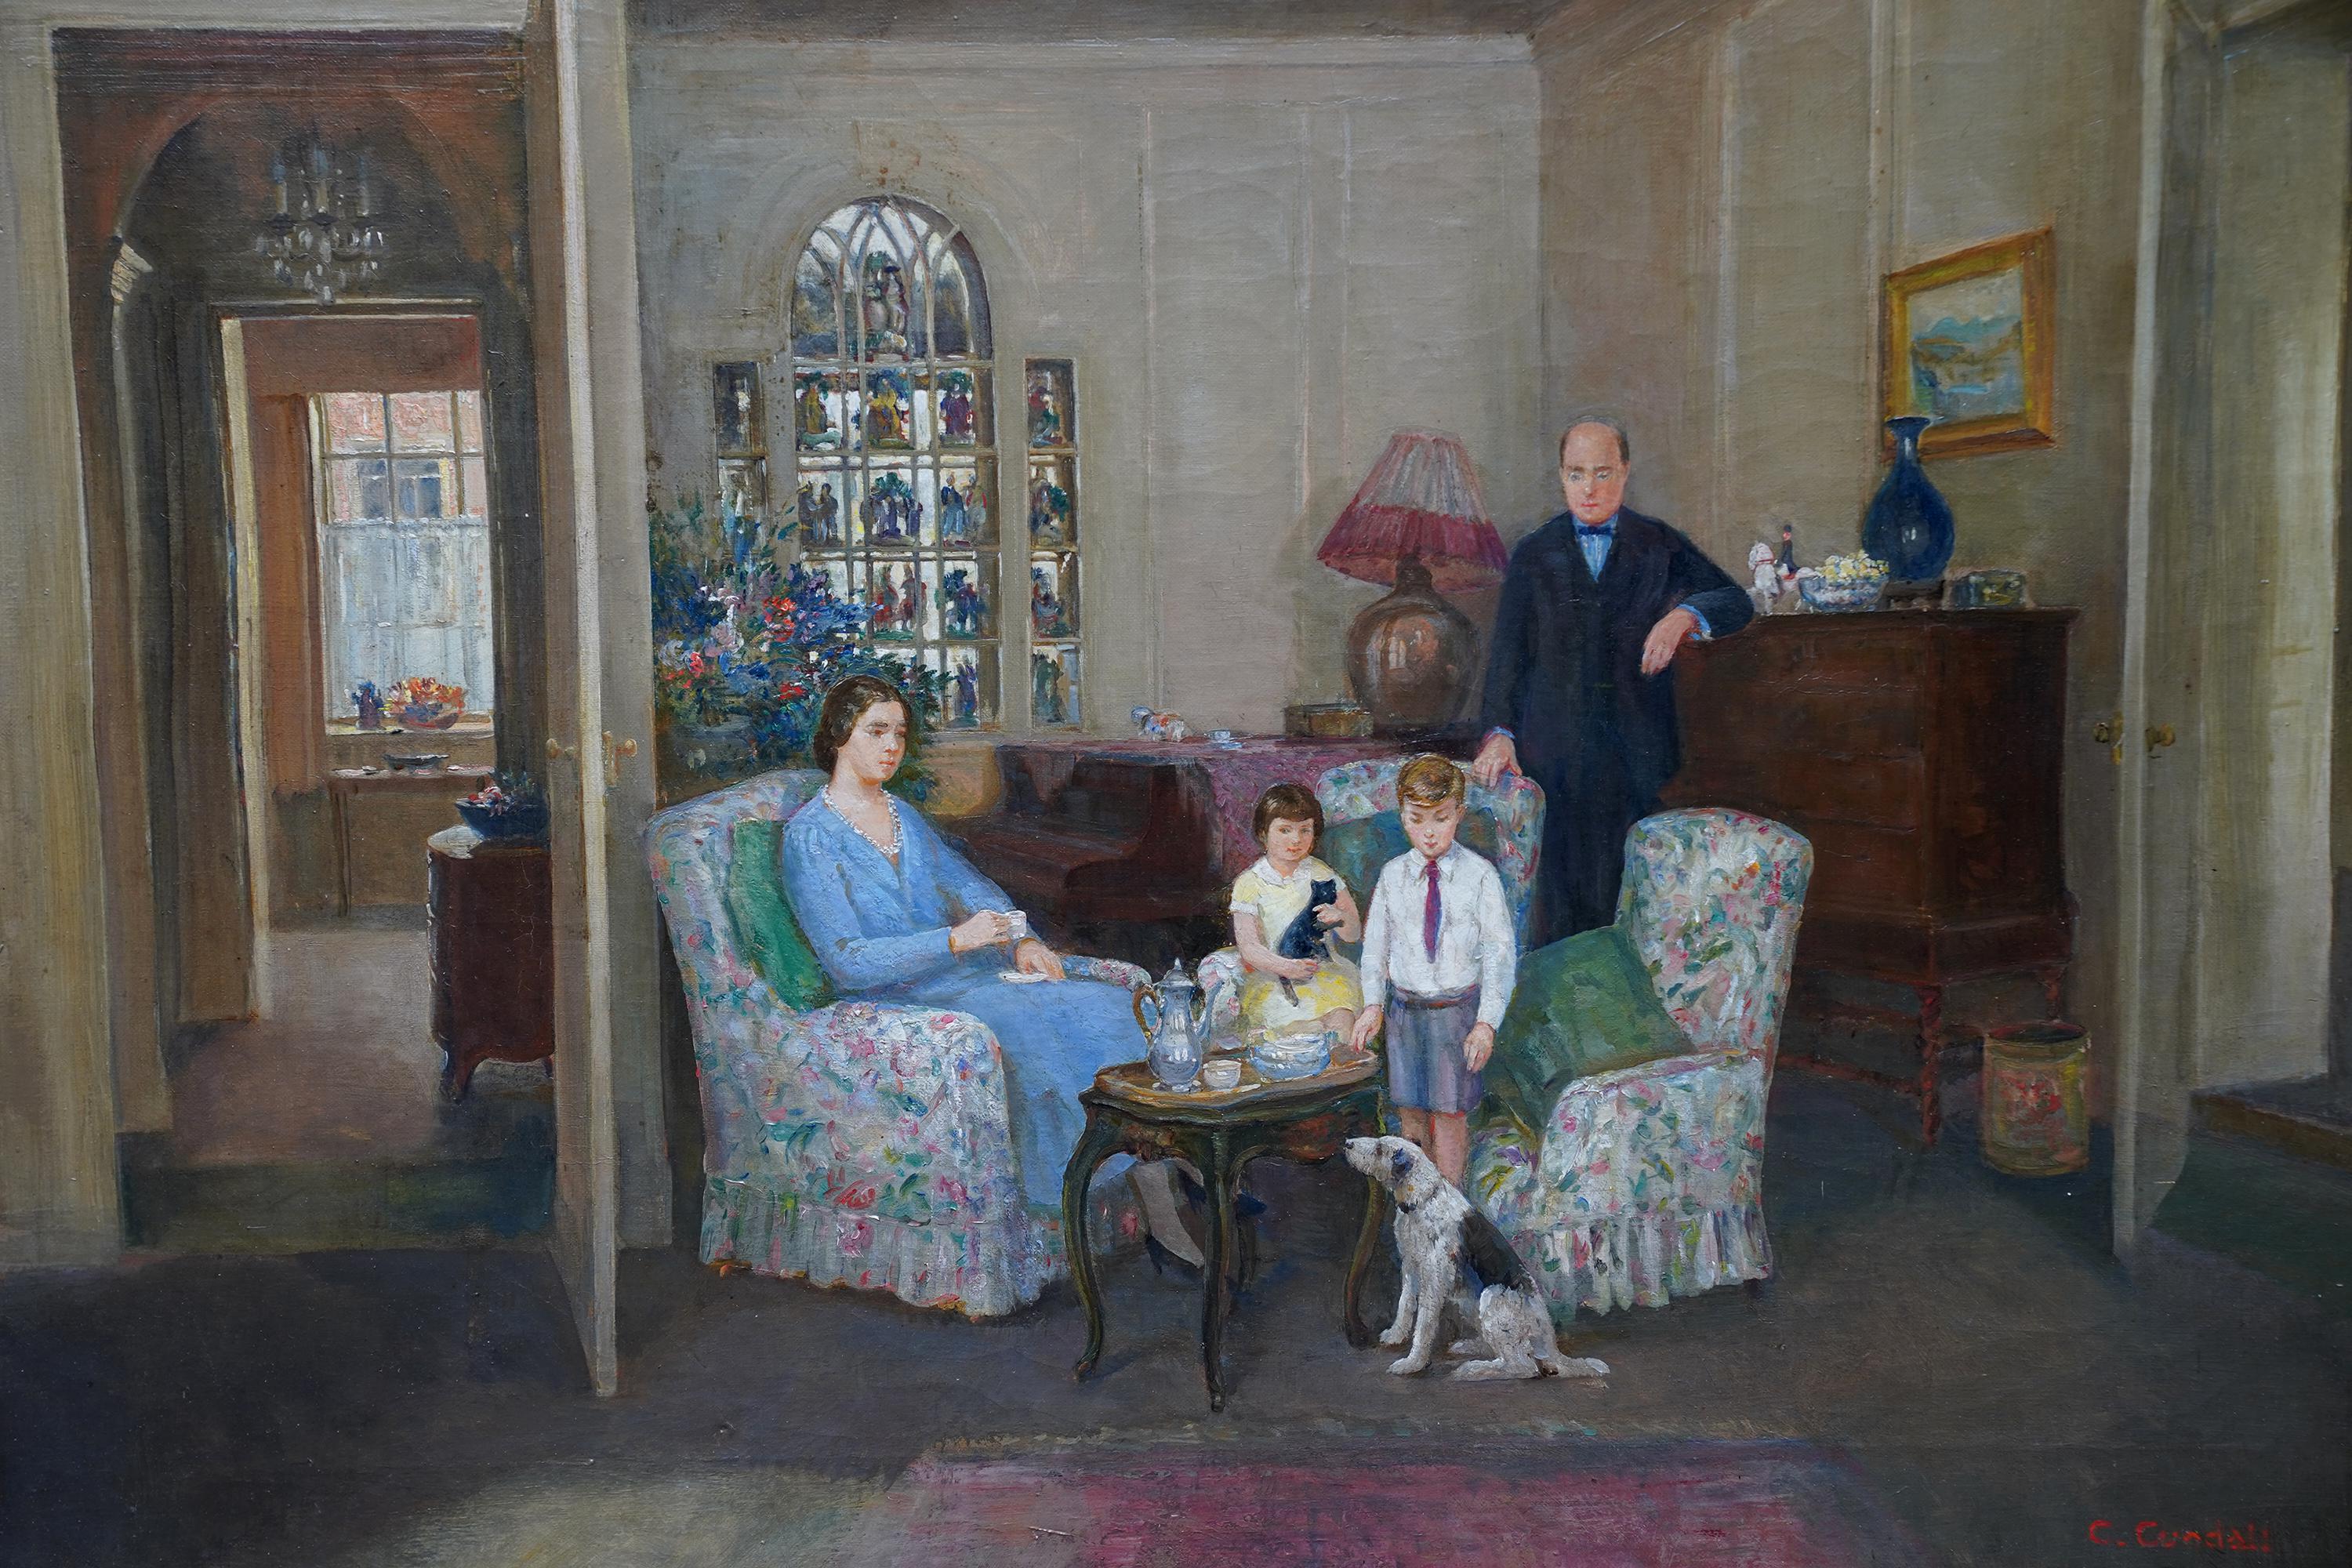 Portrait of a Family in an Interior - British 1950's art oil painting - Post-Impressionist Painting by Charles Ernest Cundall